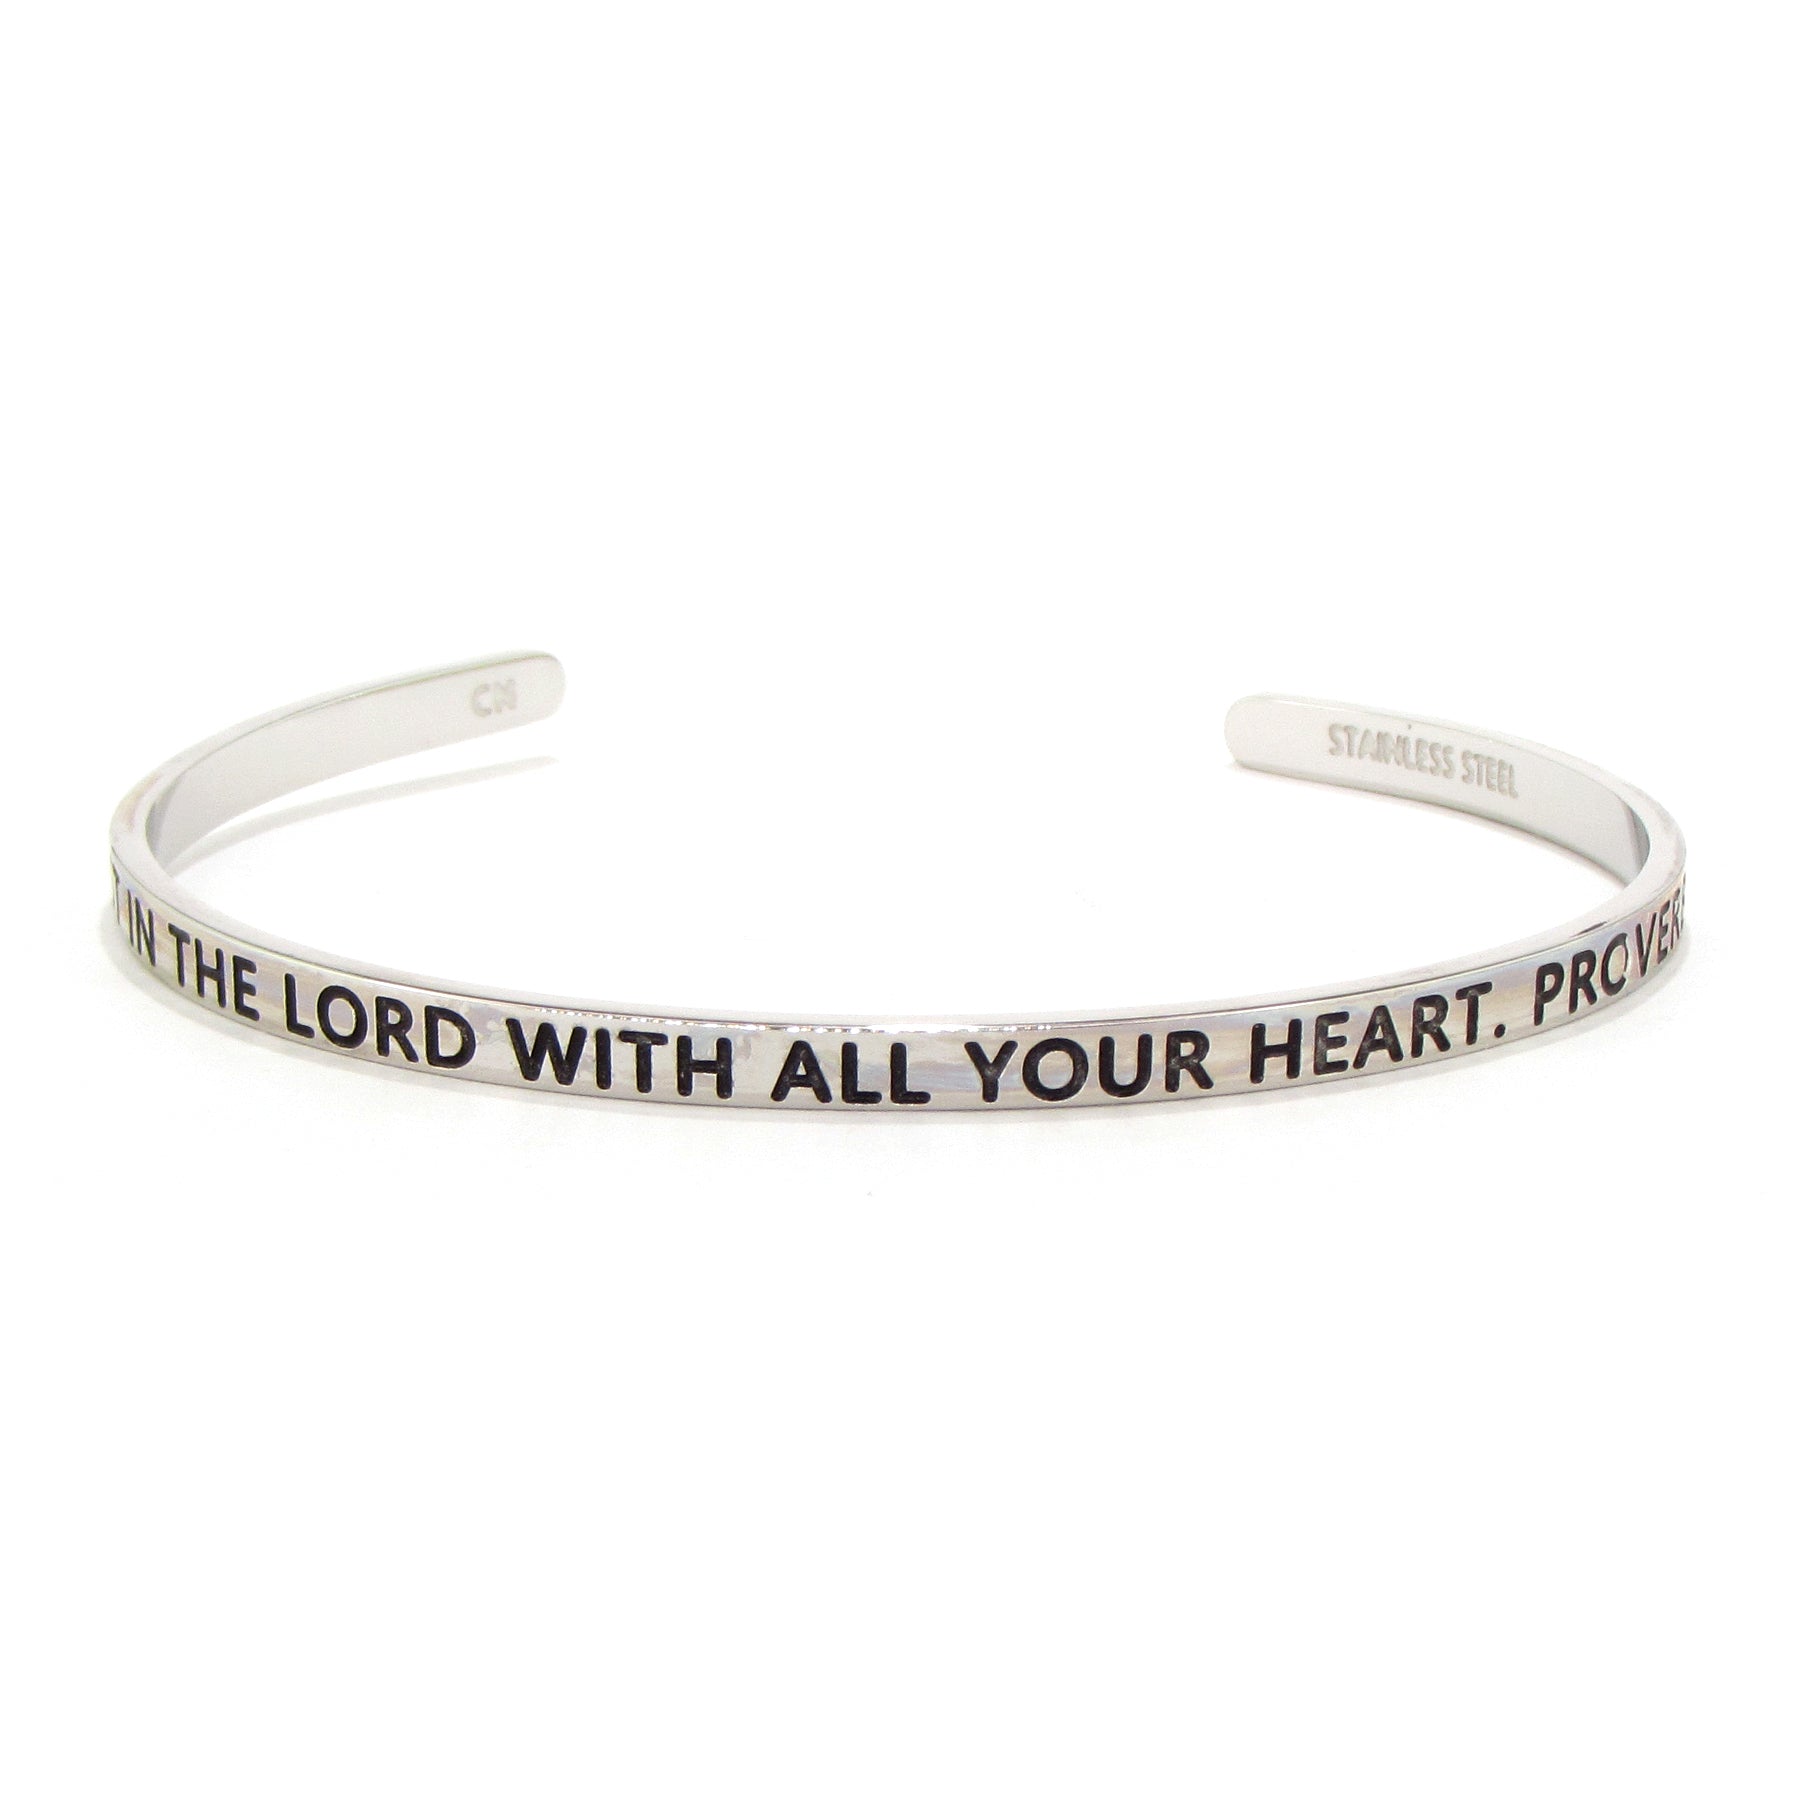 Proverbs 3:5 Trust in the Lord With All Your Heart Blessing Band, Silver Cuff Bracelet